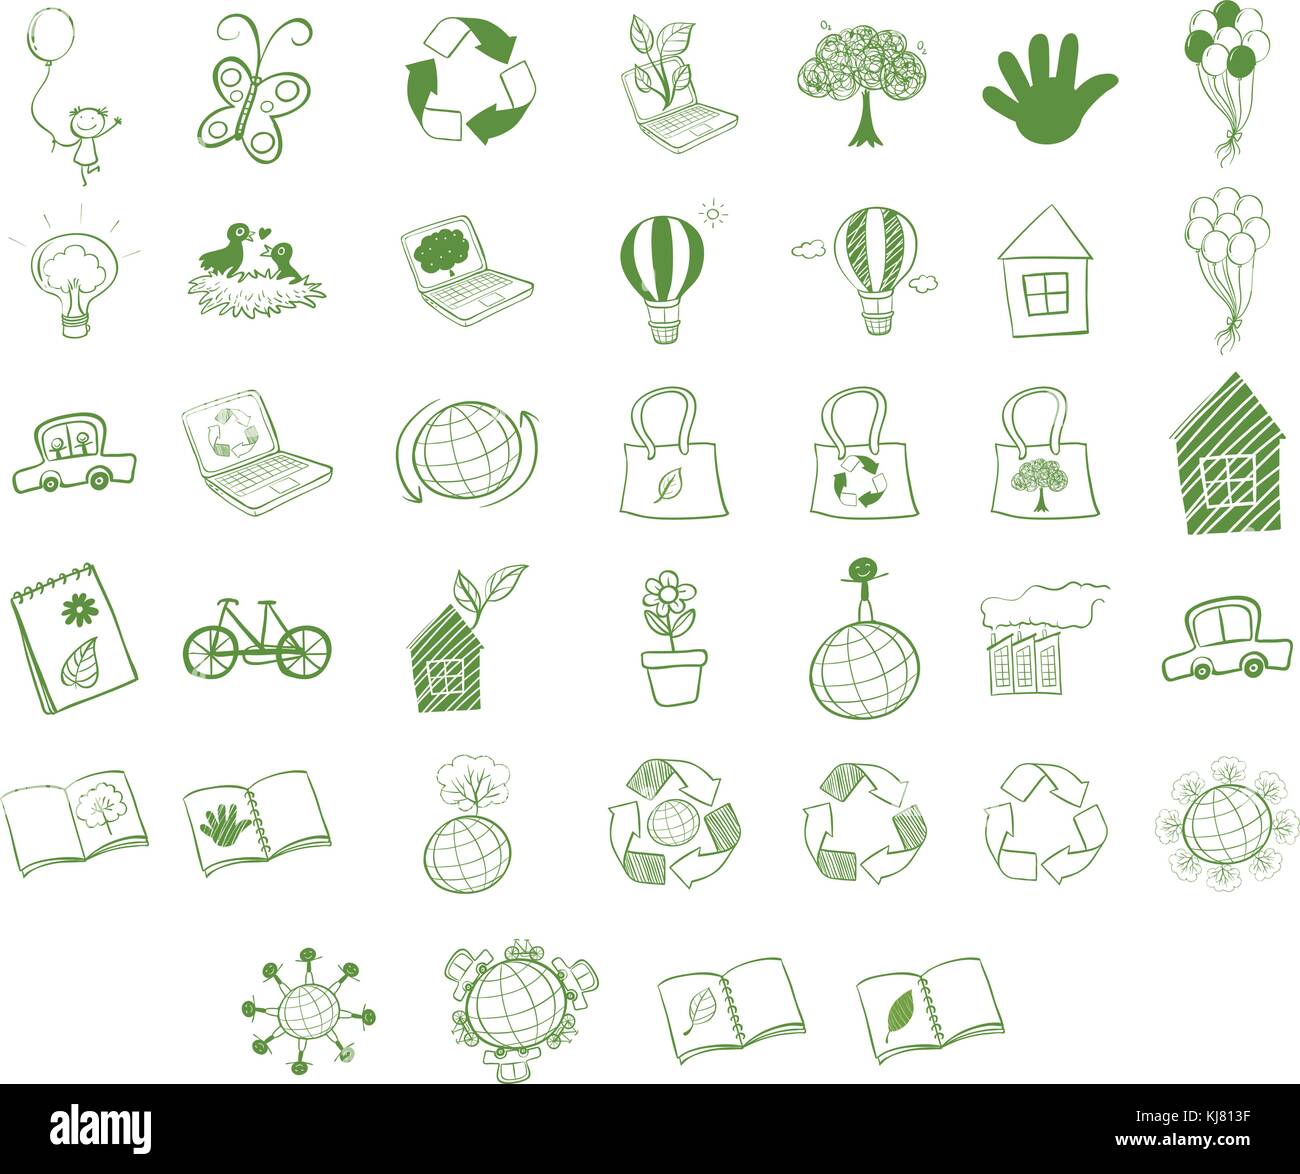 Illustration of the different eco-friendly objects on a white background Stock Vector